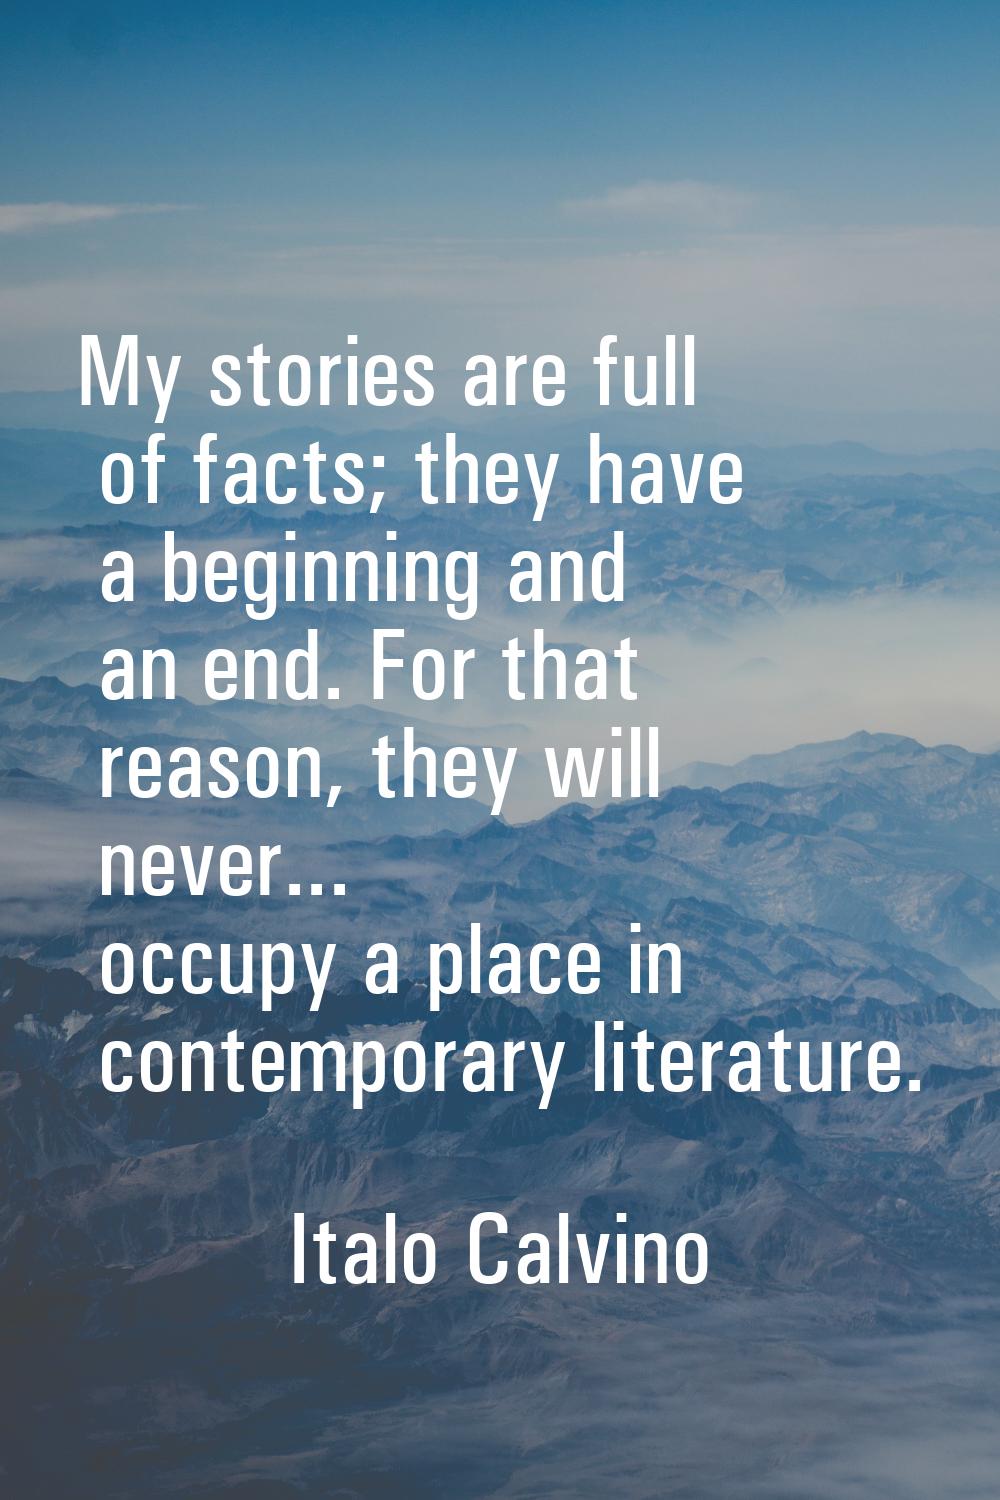 My stories are full of facts; they have a beginning and an end. For that reason, they will never...